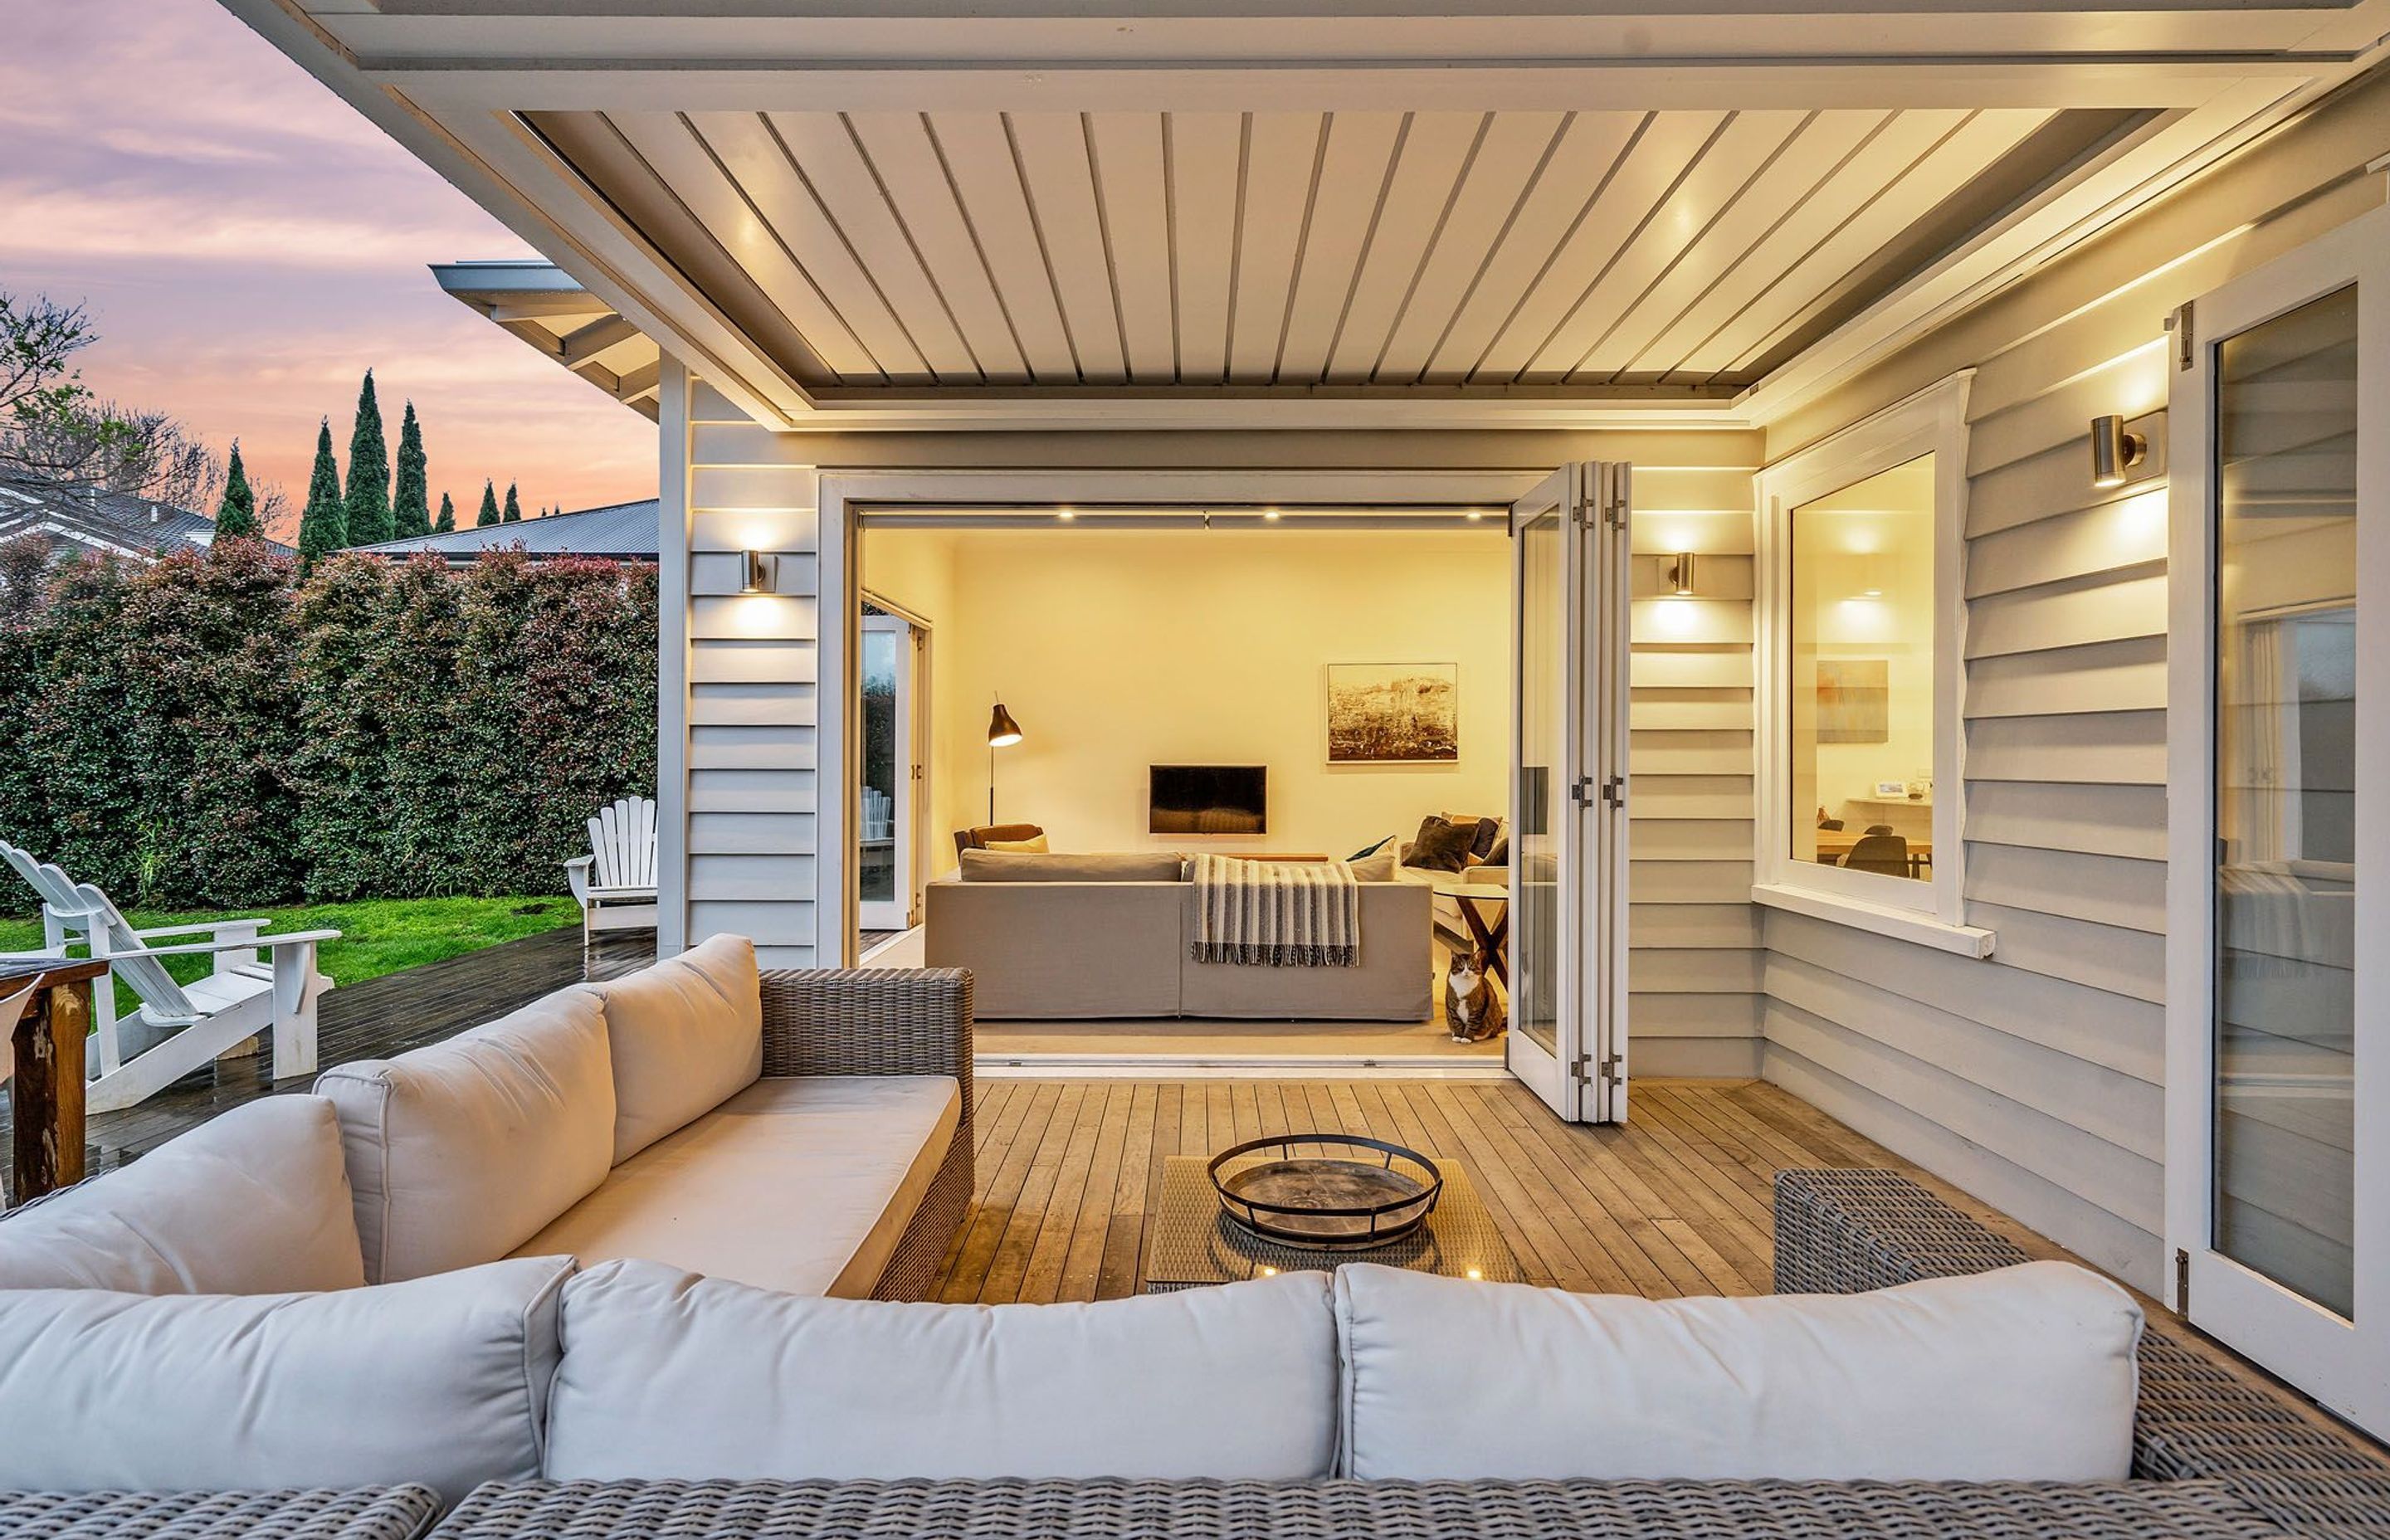 As per modern living, provision has been made for outdoor entertaining thanks to the louvred pergola.